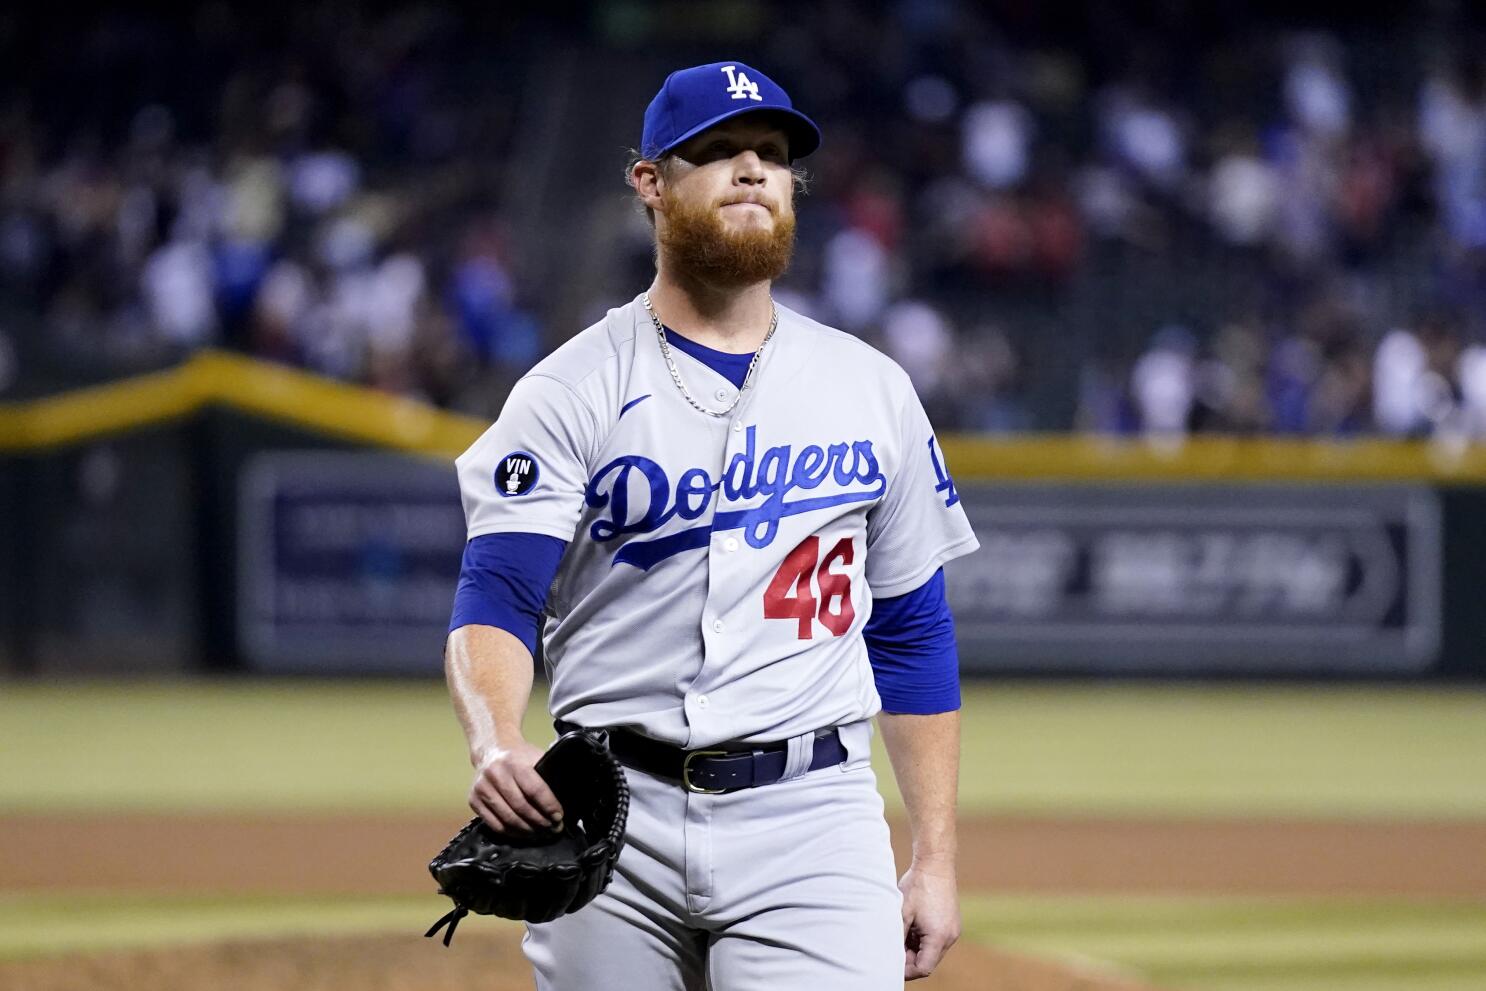 Craig Kimbrel Dodgers Interview  Reaction to the Trade and Excitement to  join the Dodgers 